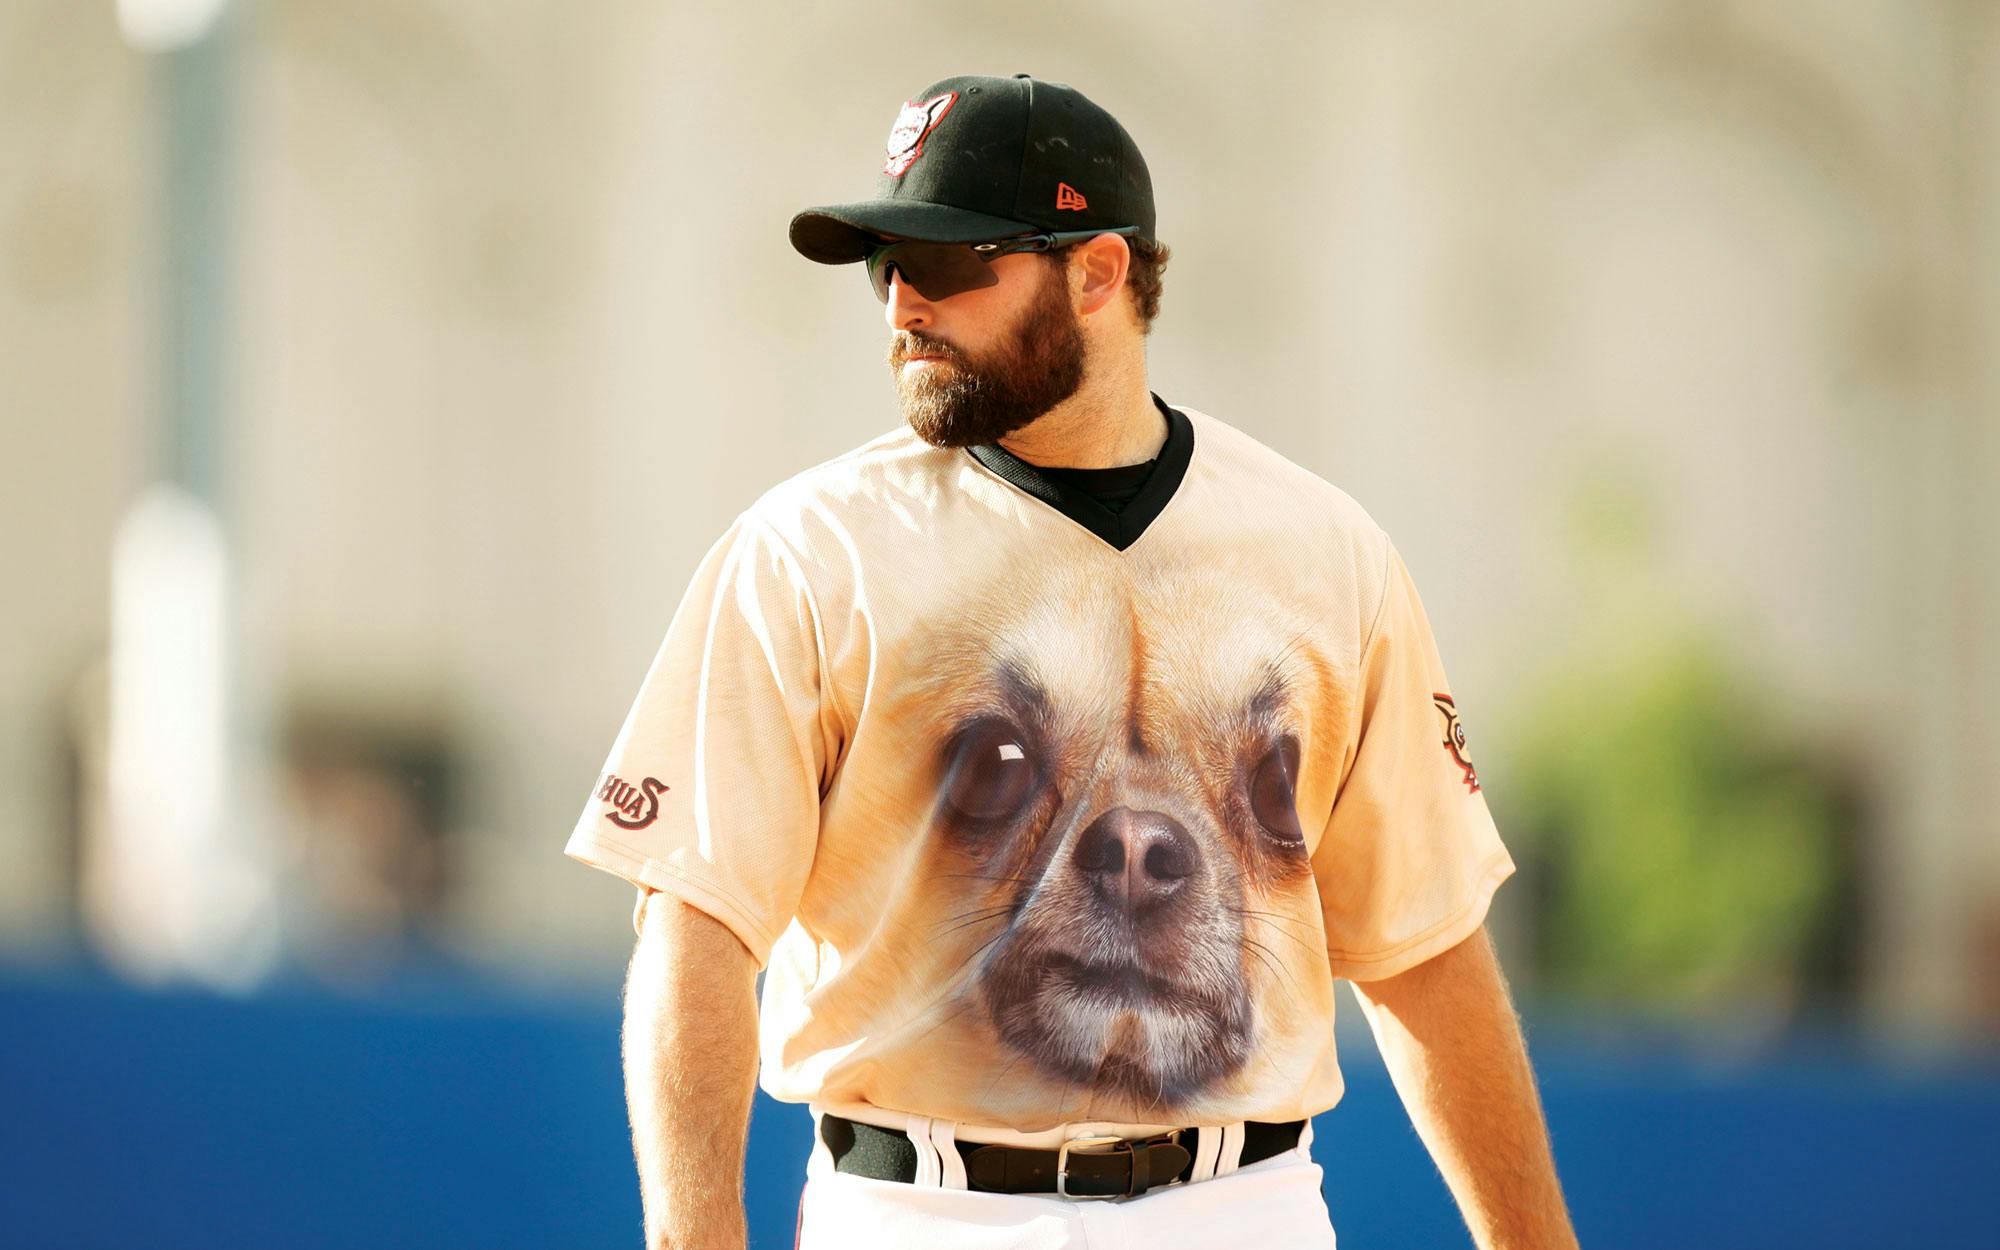 El Paso Chihuahuas bring back dog face jerseys for 'Bark at the Park' event  